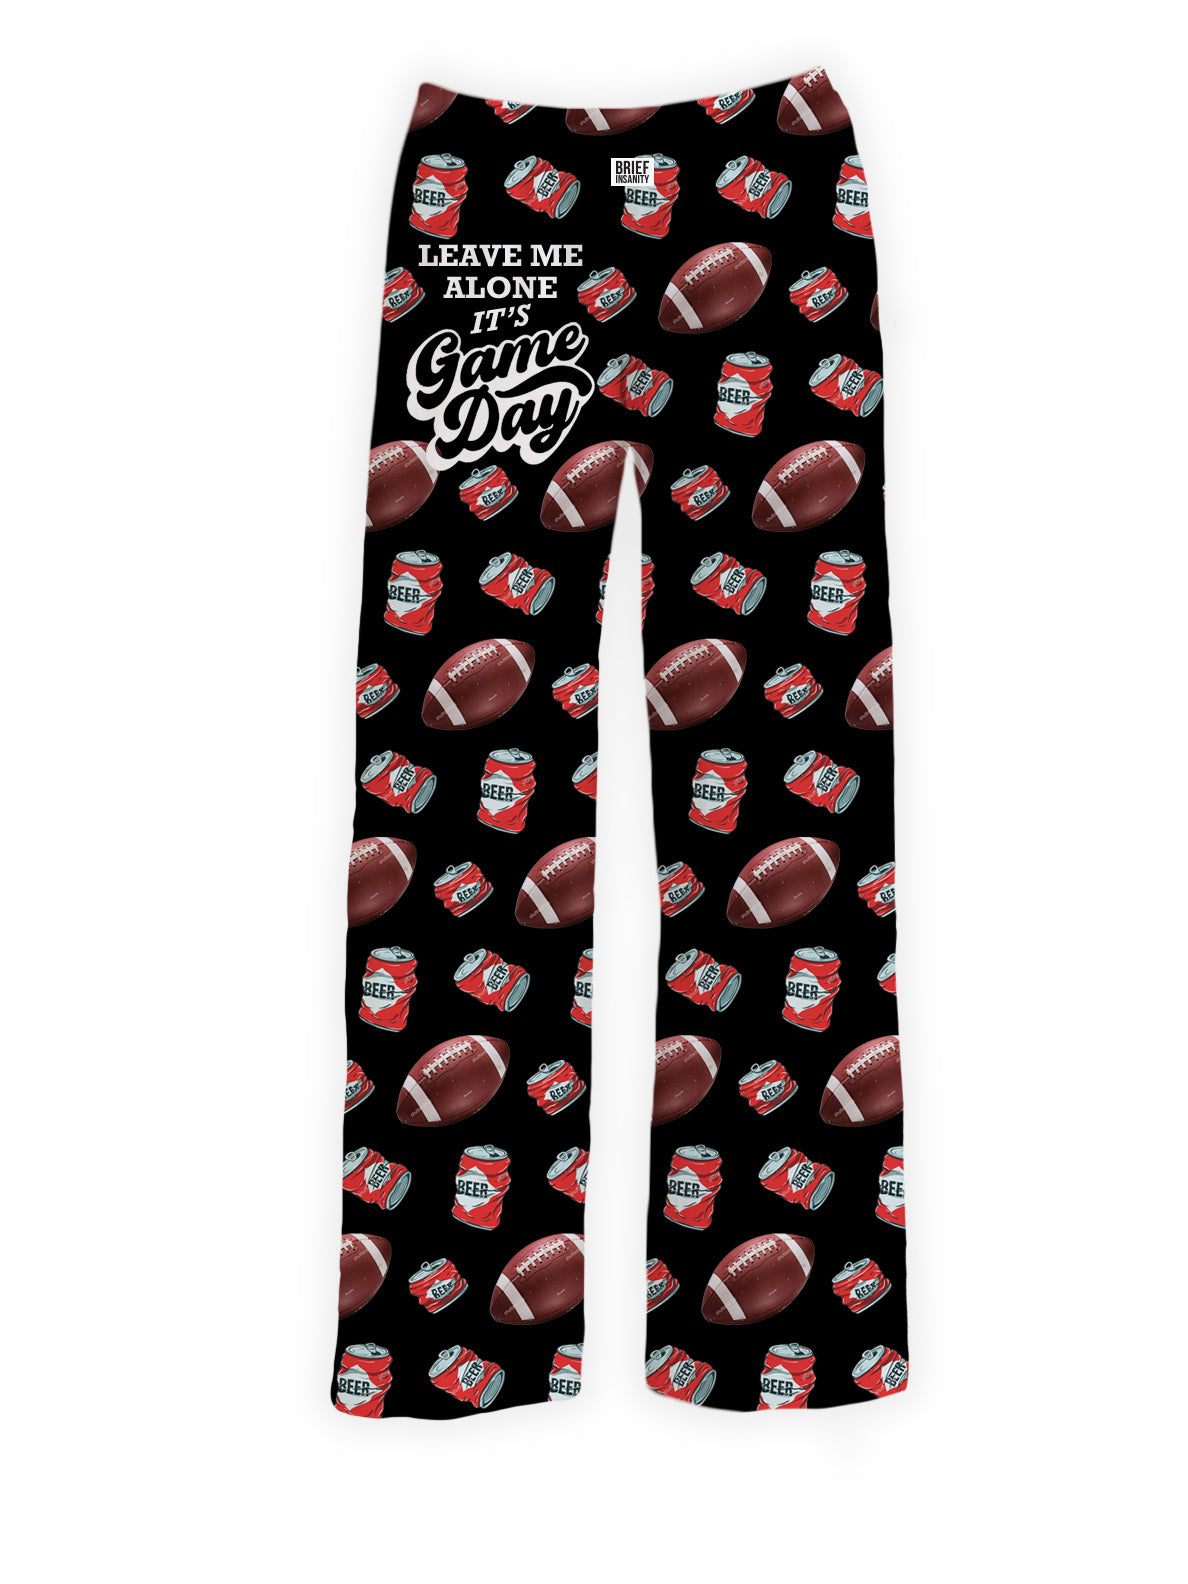 It's Game Day Lounge Pants